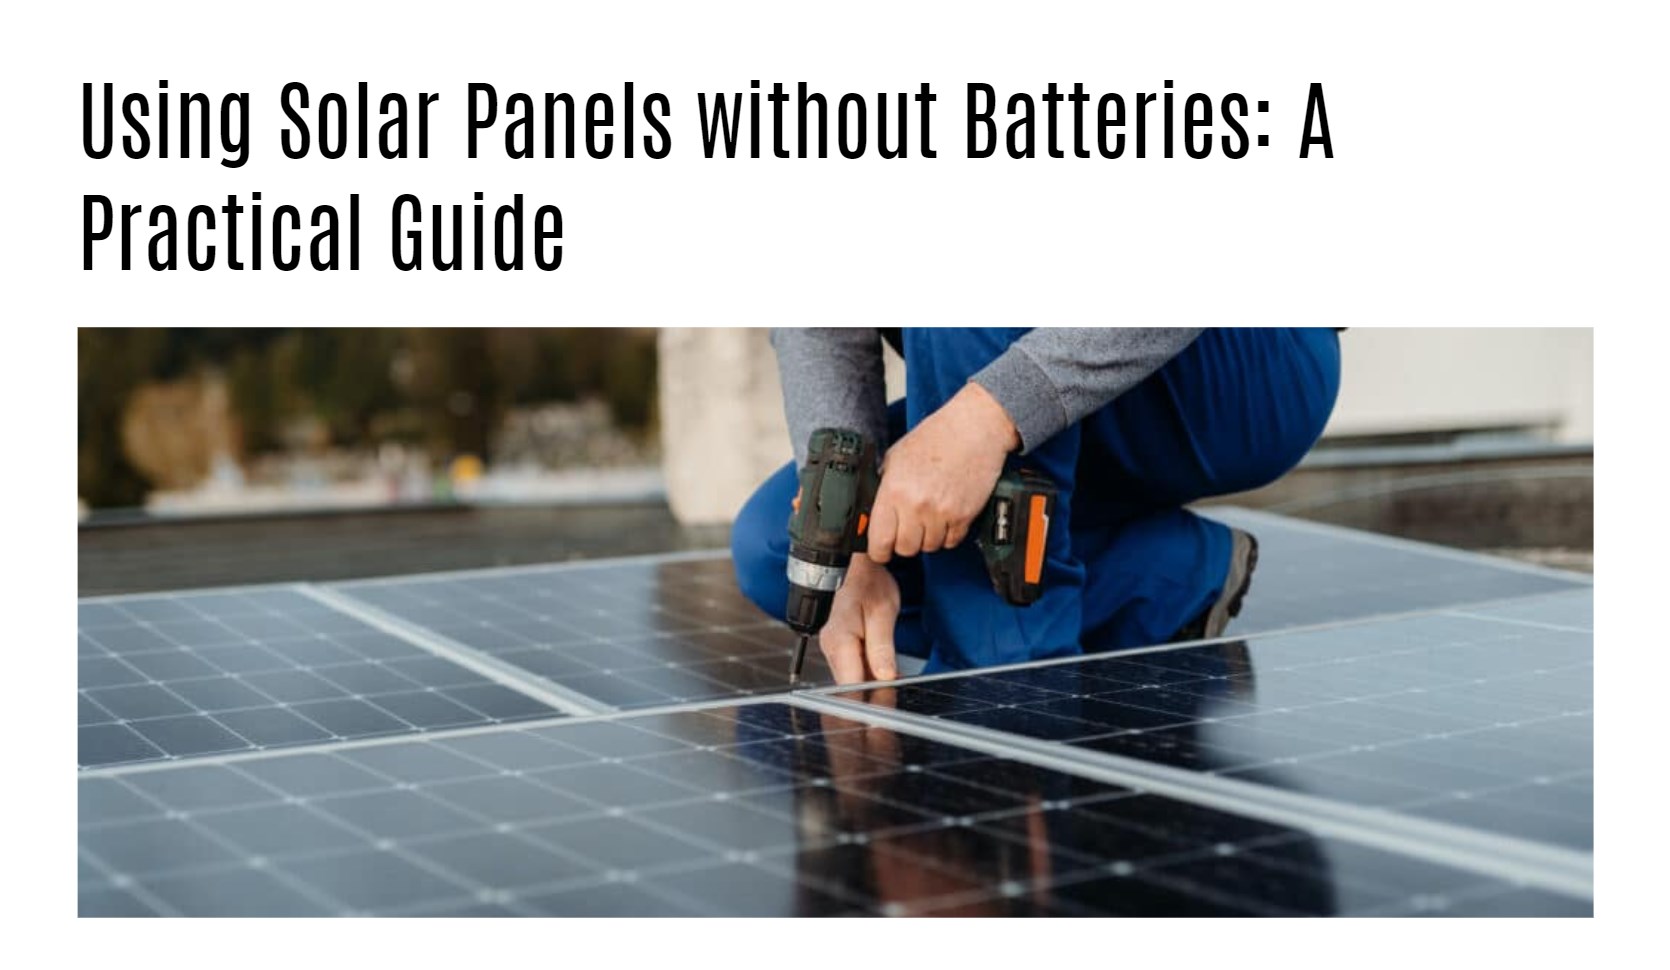 Using Solar Panels without Batteries: A Practical Guide